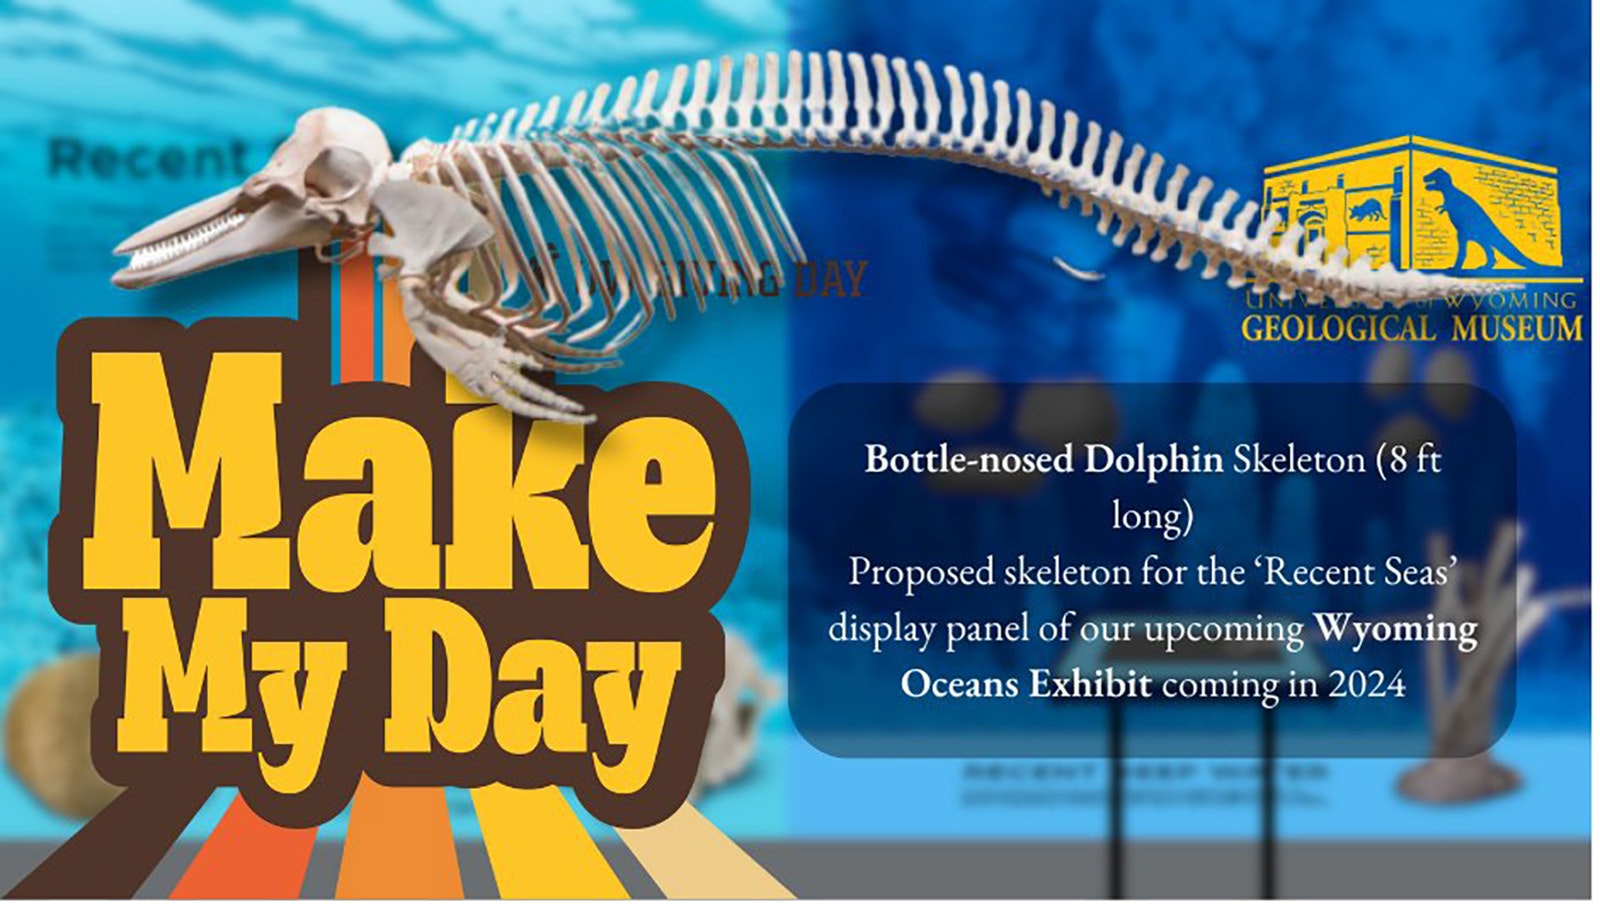 University of Wyoming promotional art of its effort to get a dolphin skeleton.